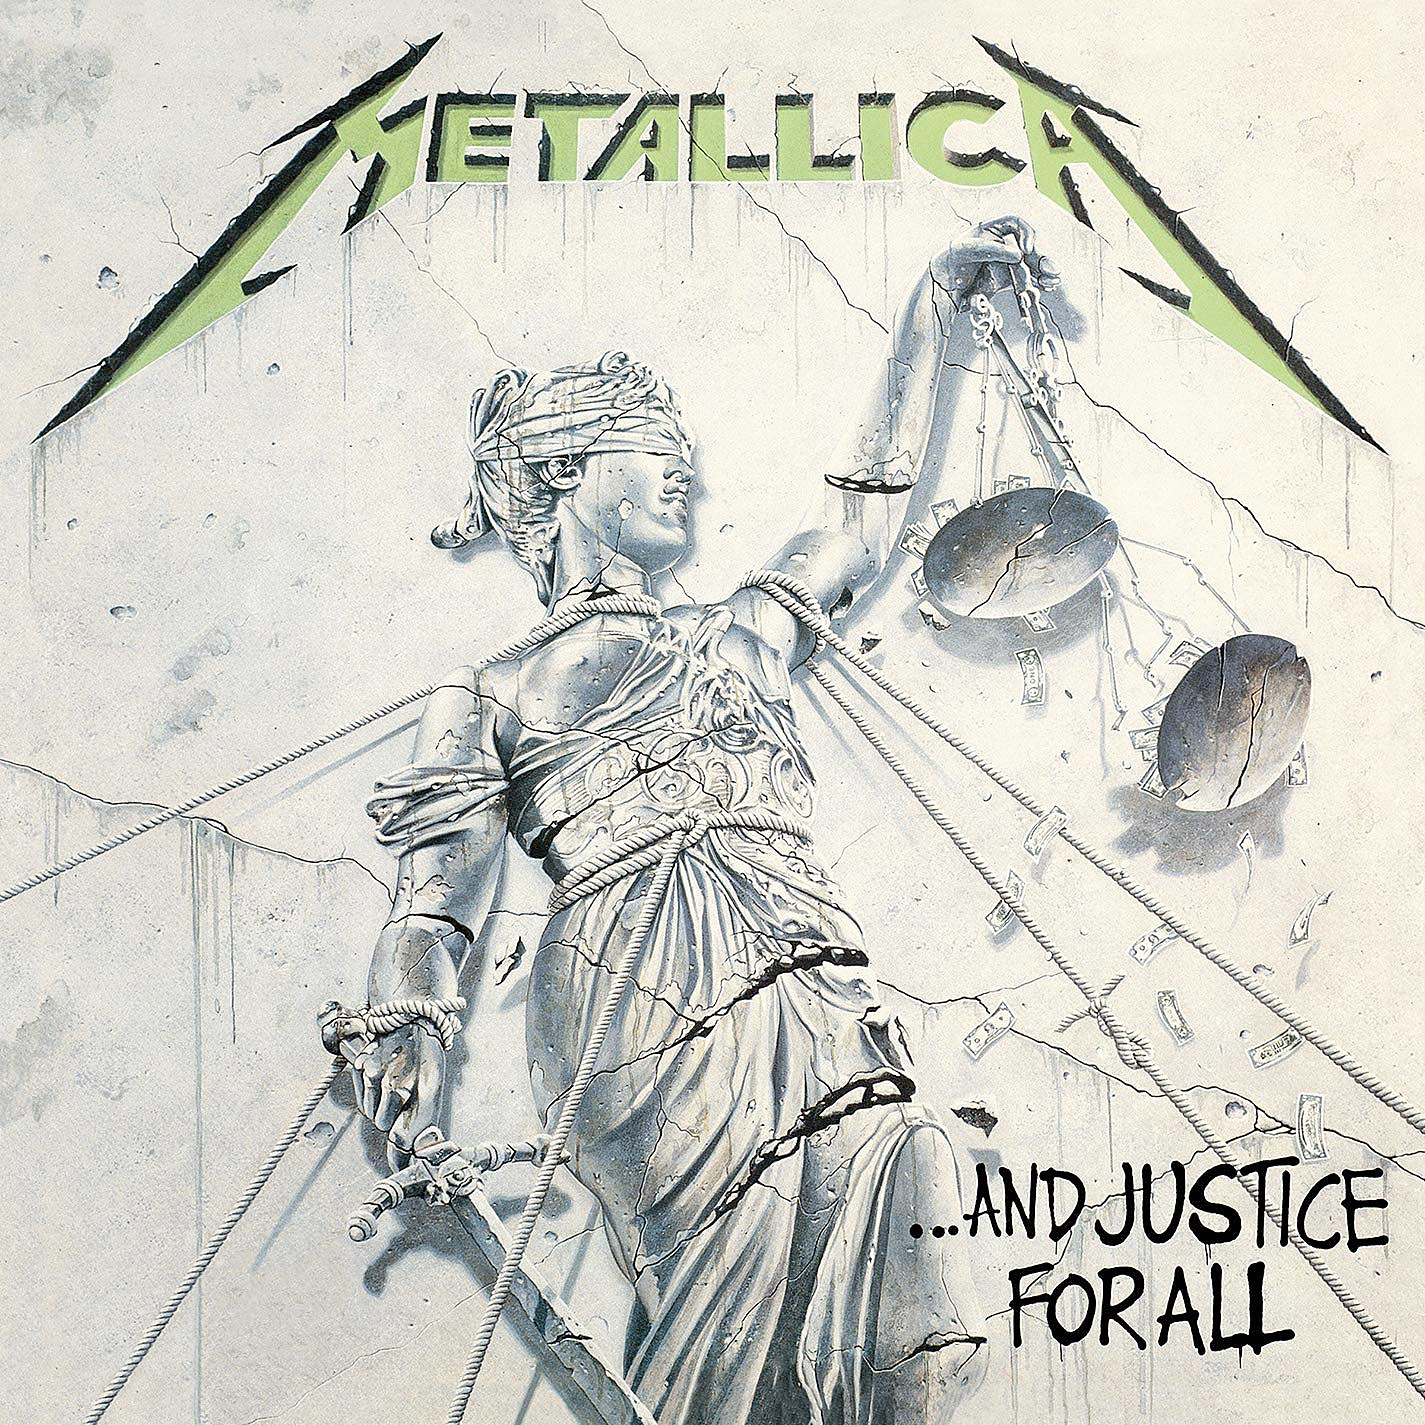 Metallica '...And Justice for All 2 LP' vinyl